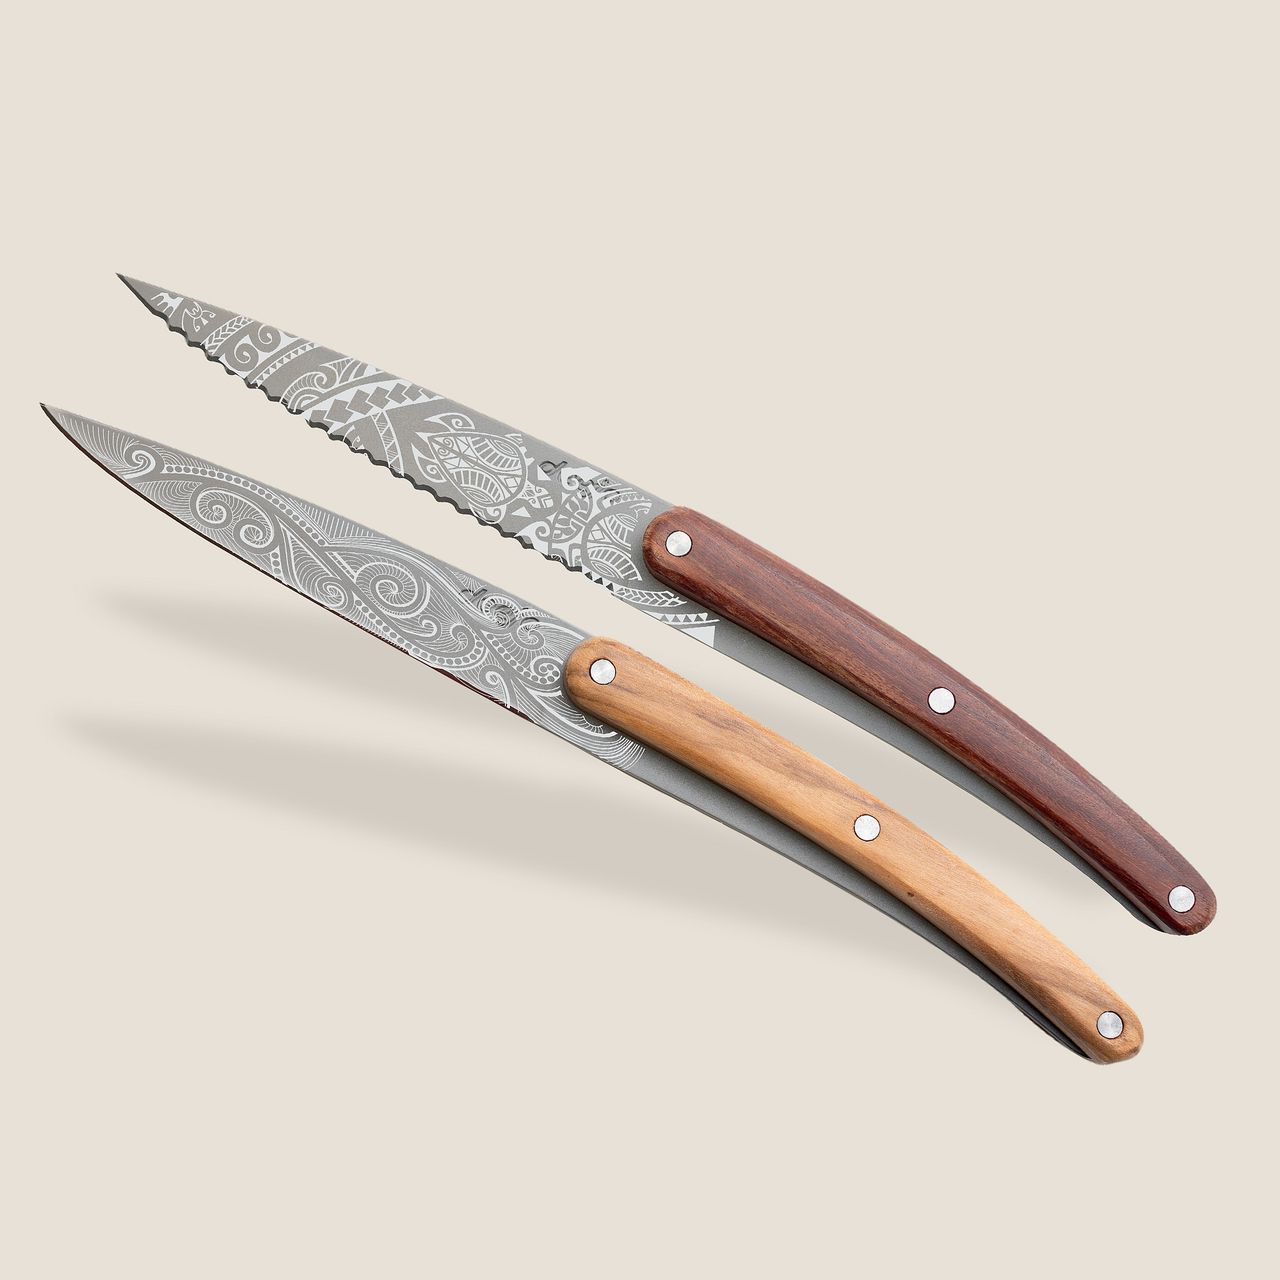 https://www.deejo.com/medias/produits/1637531006/24372_1280-2-deejo-paring-knives-olive-and-coral-wood-polynesian-and-pacific.jpg